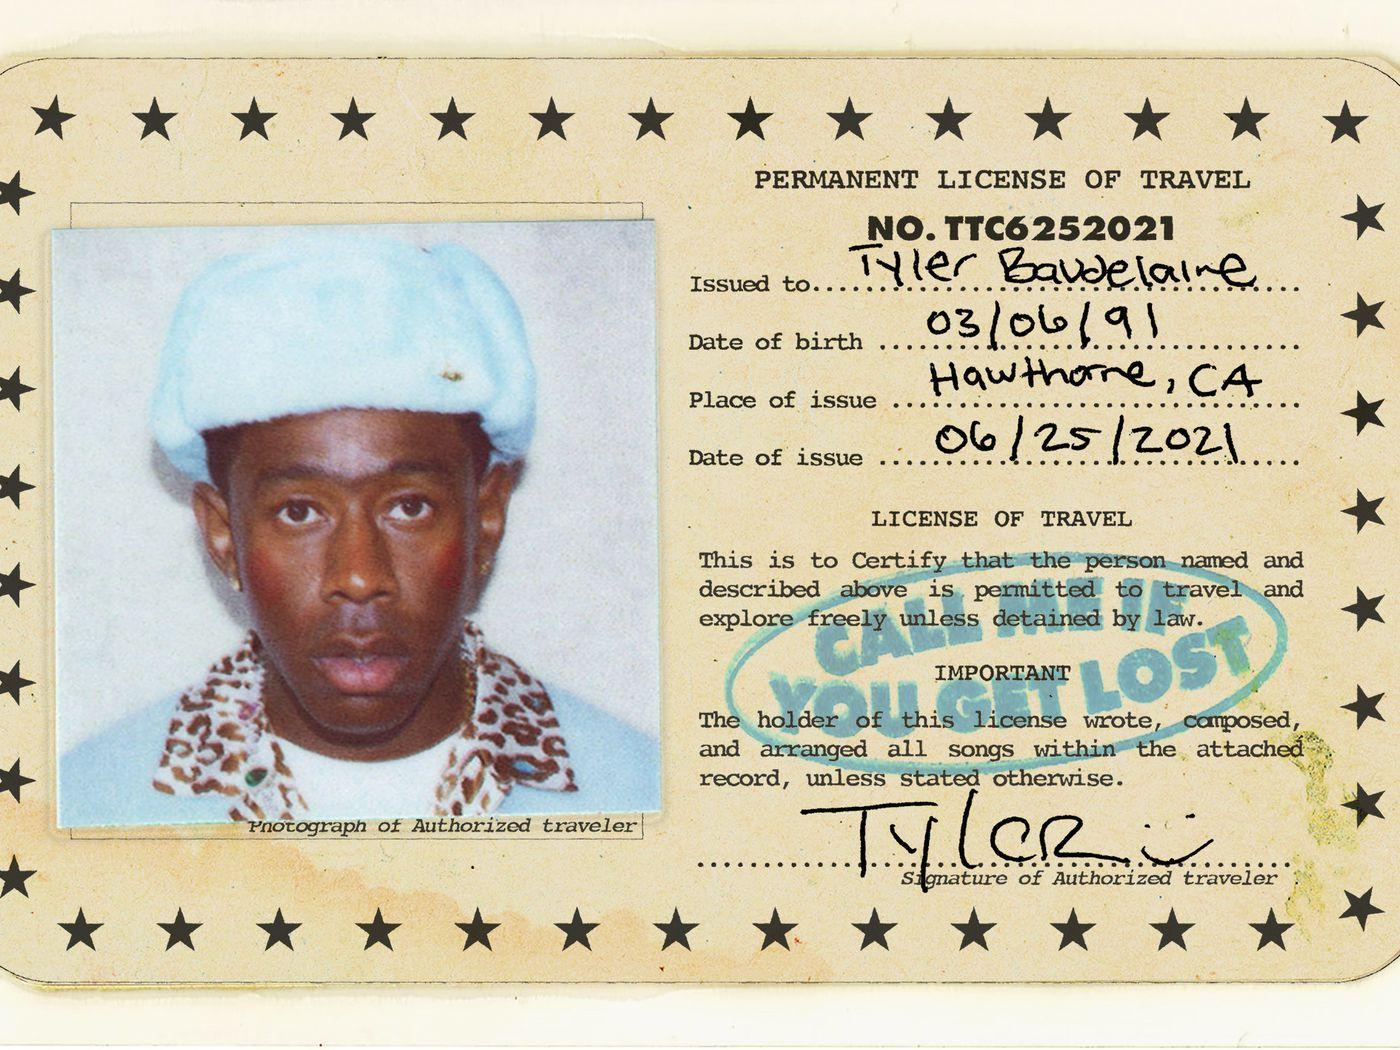 Trying to find out the different fonts Tyler, The Creator used for ID